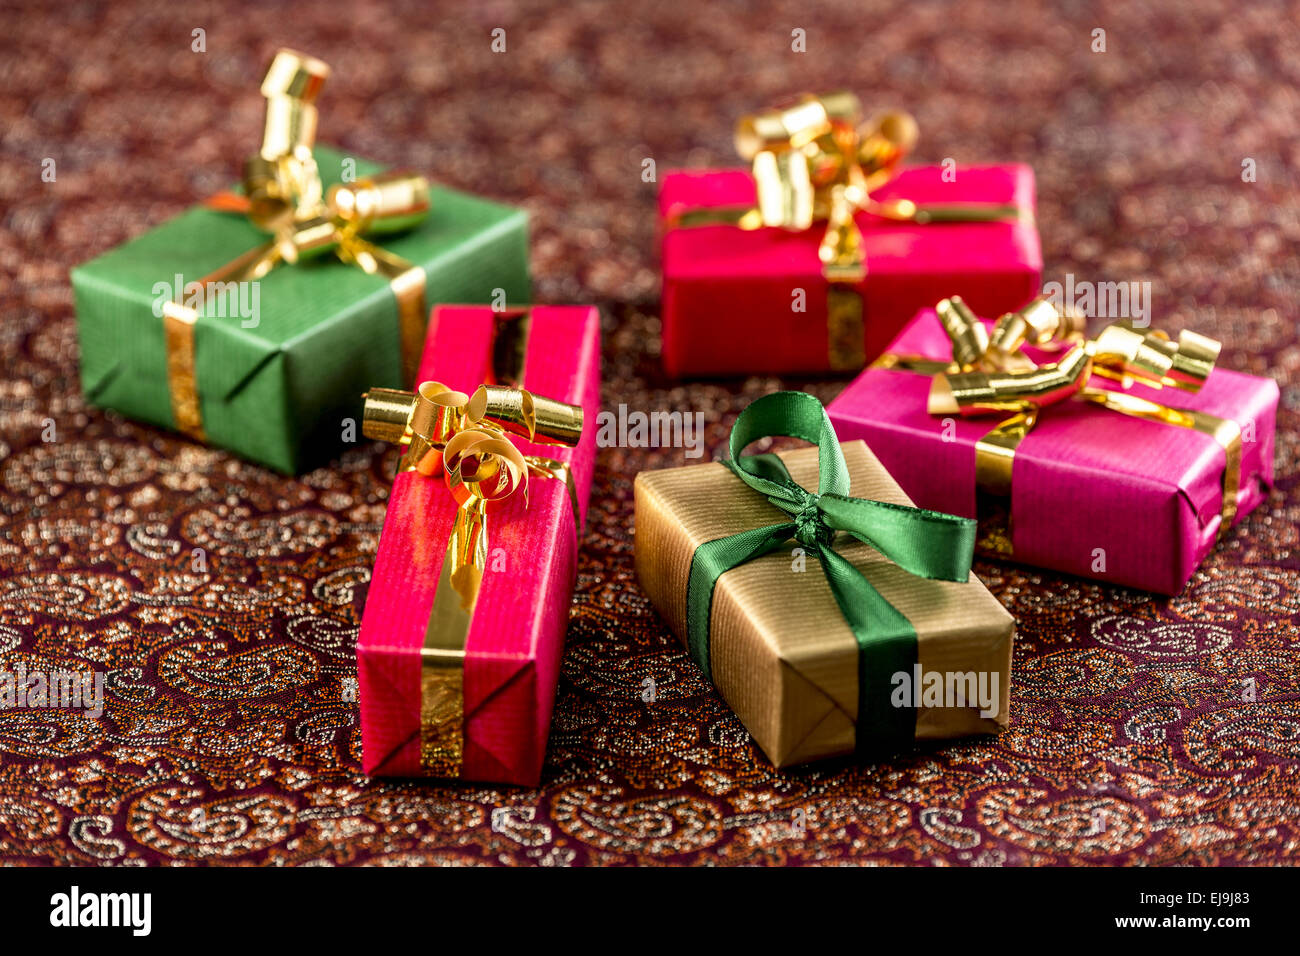 Five Little Presents with Bows Stock Photo